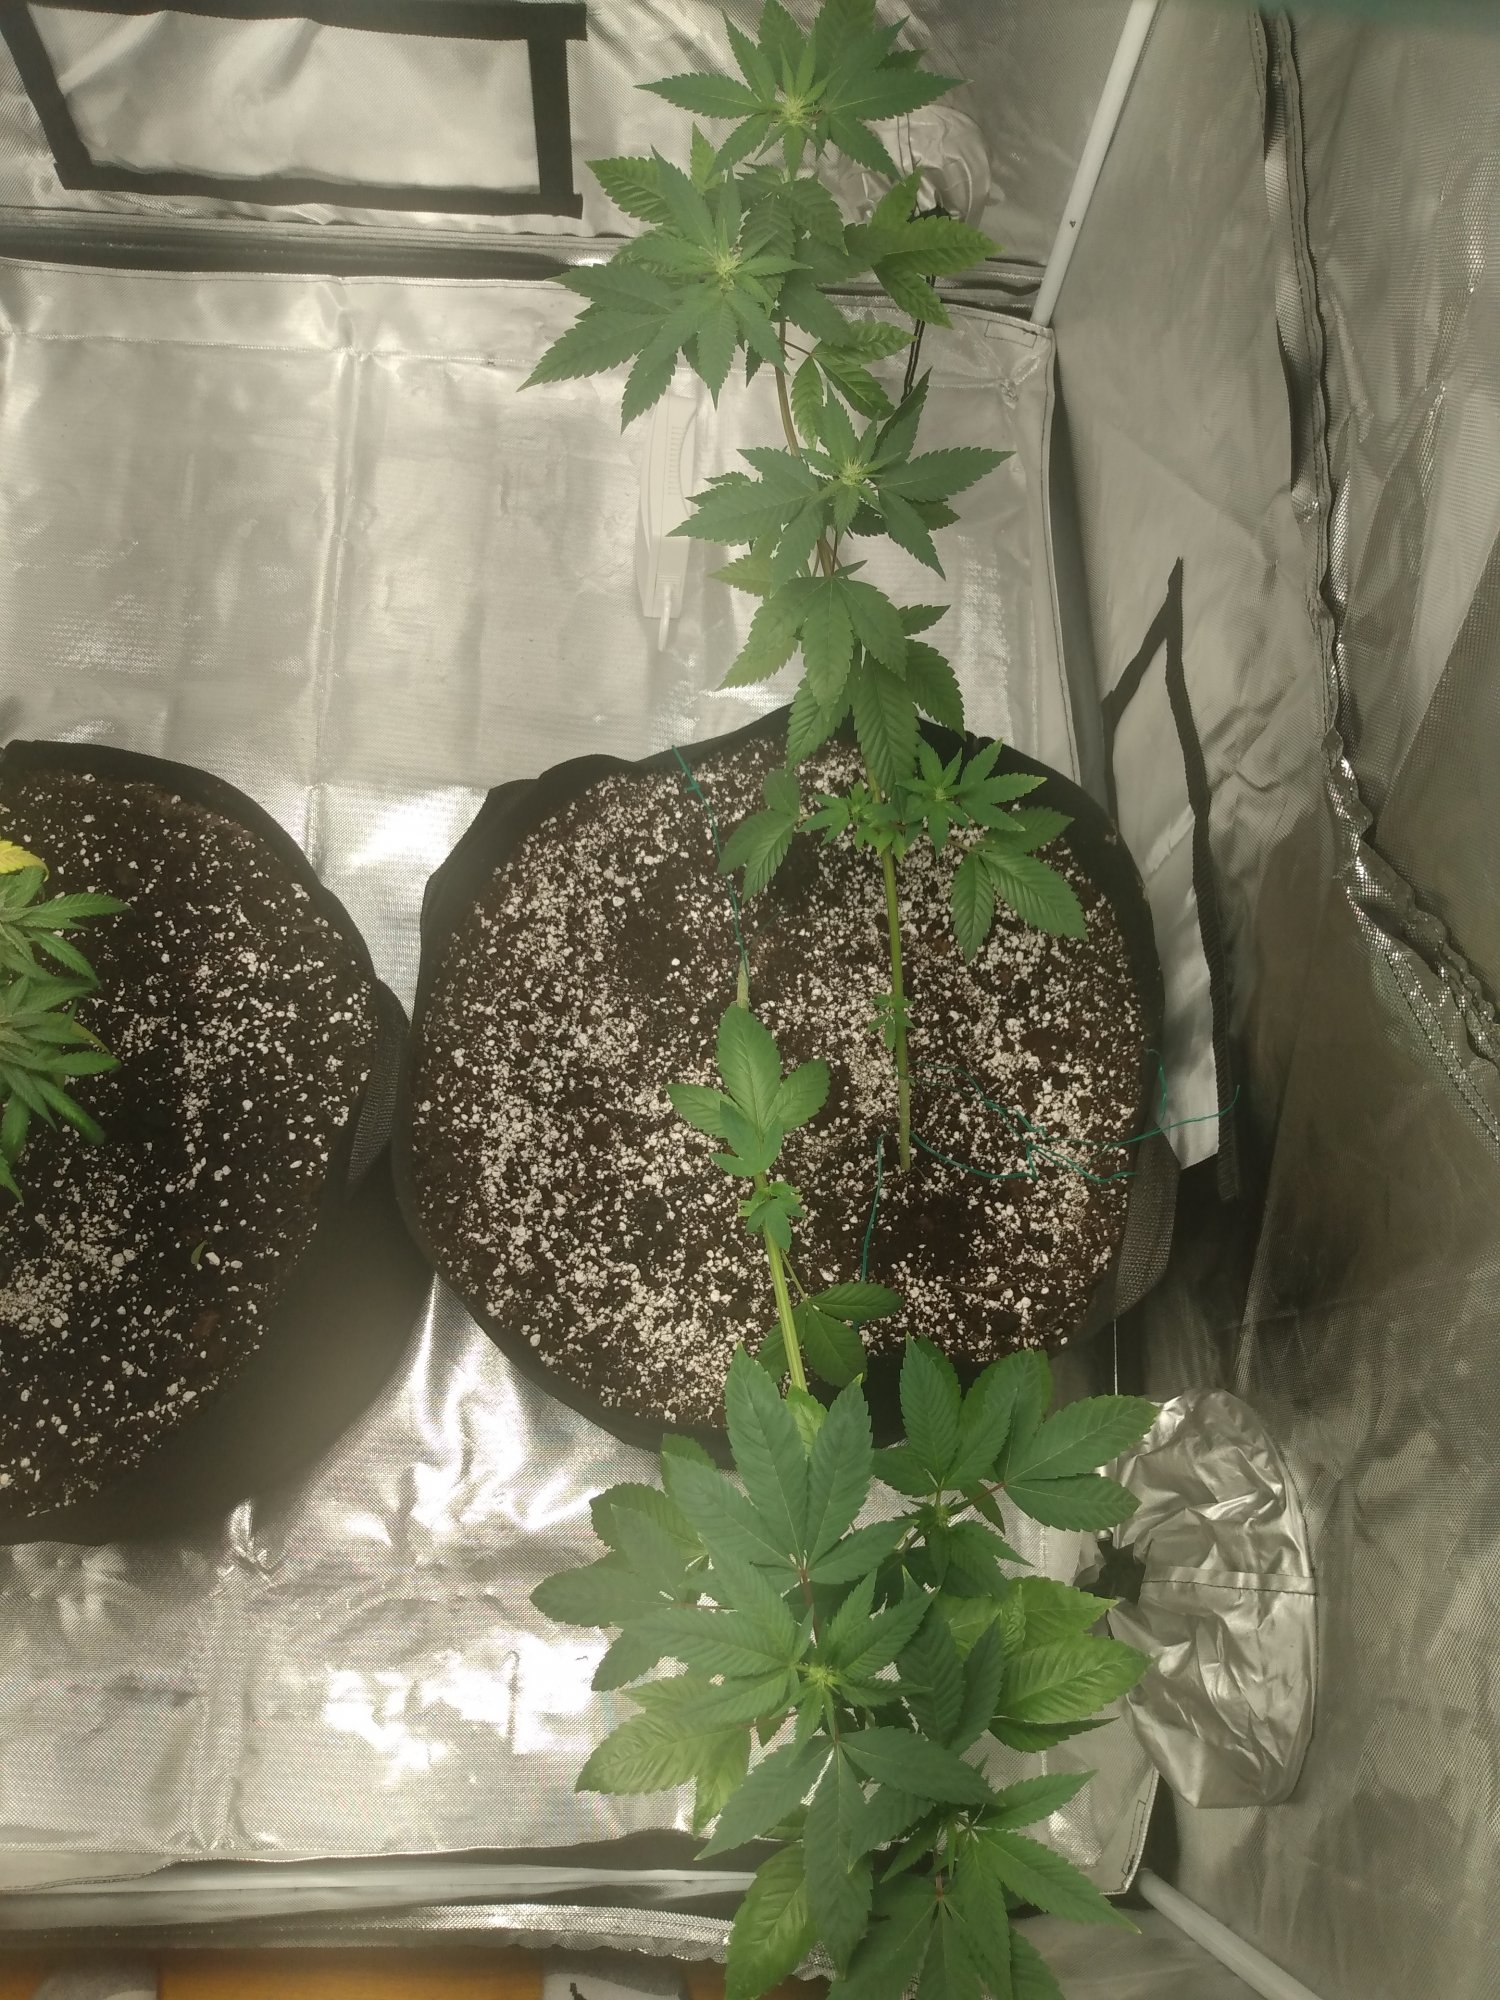 What do you all think of growing multiple plants of the same strain in the same pots